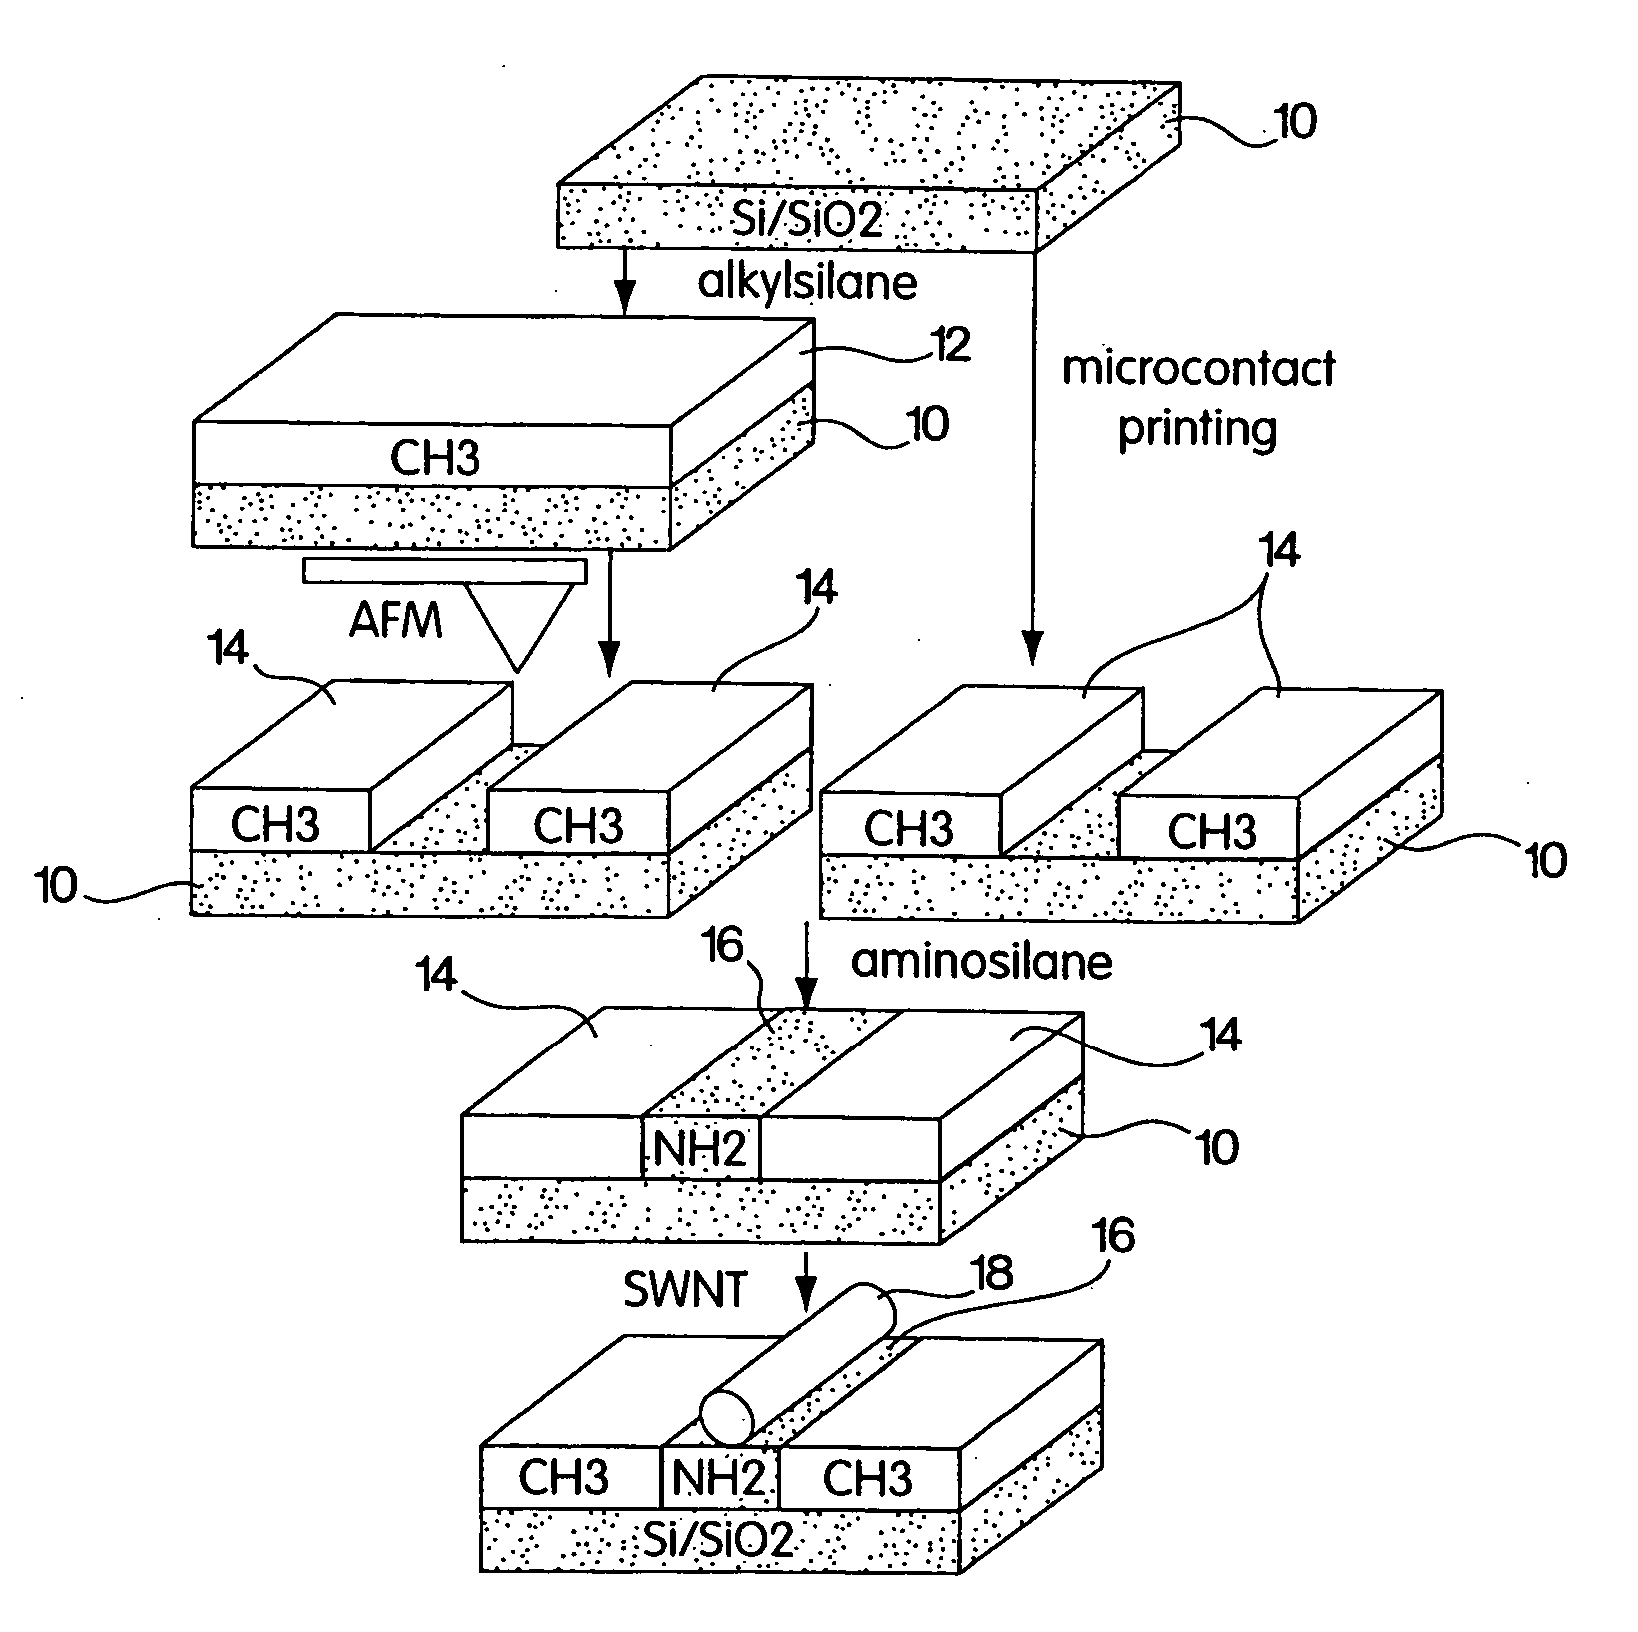 Nanoscopic wire-based devices and arrays